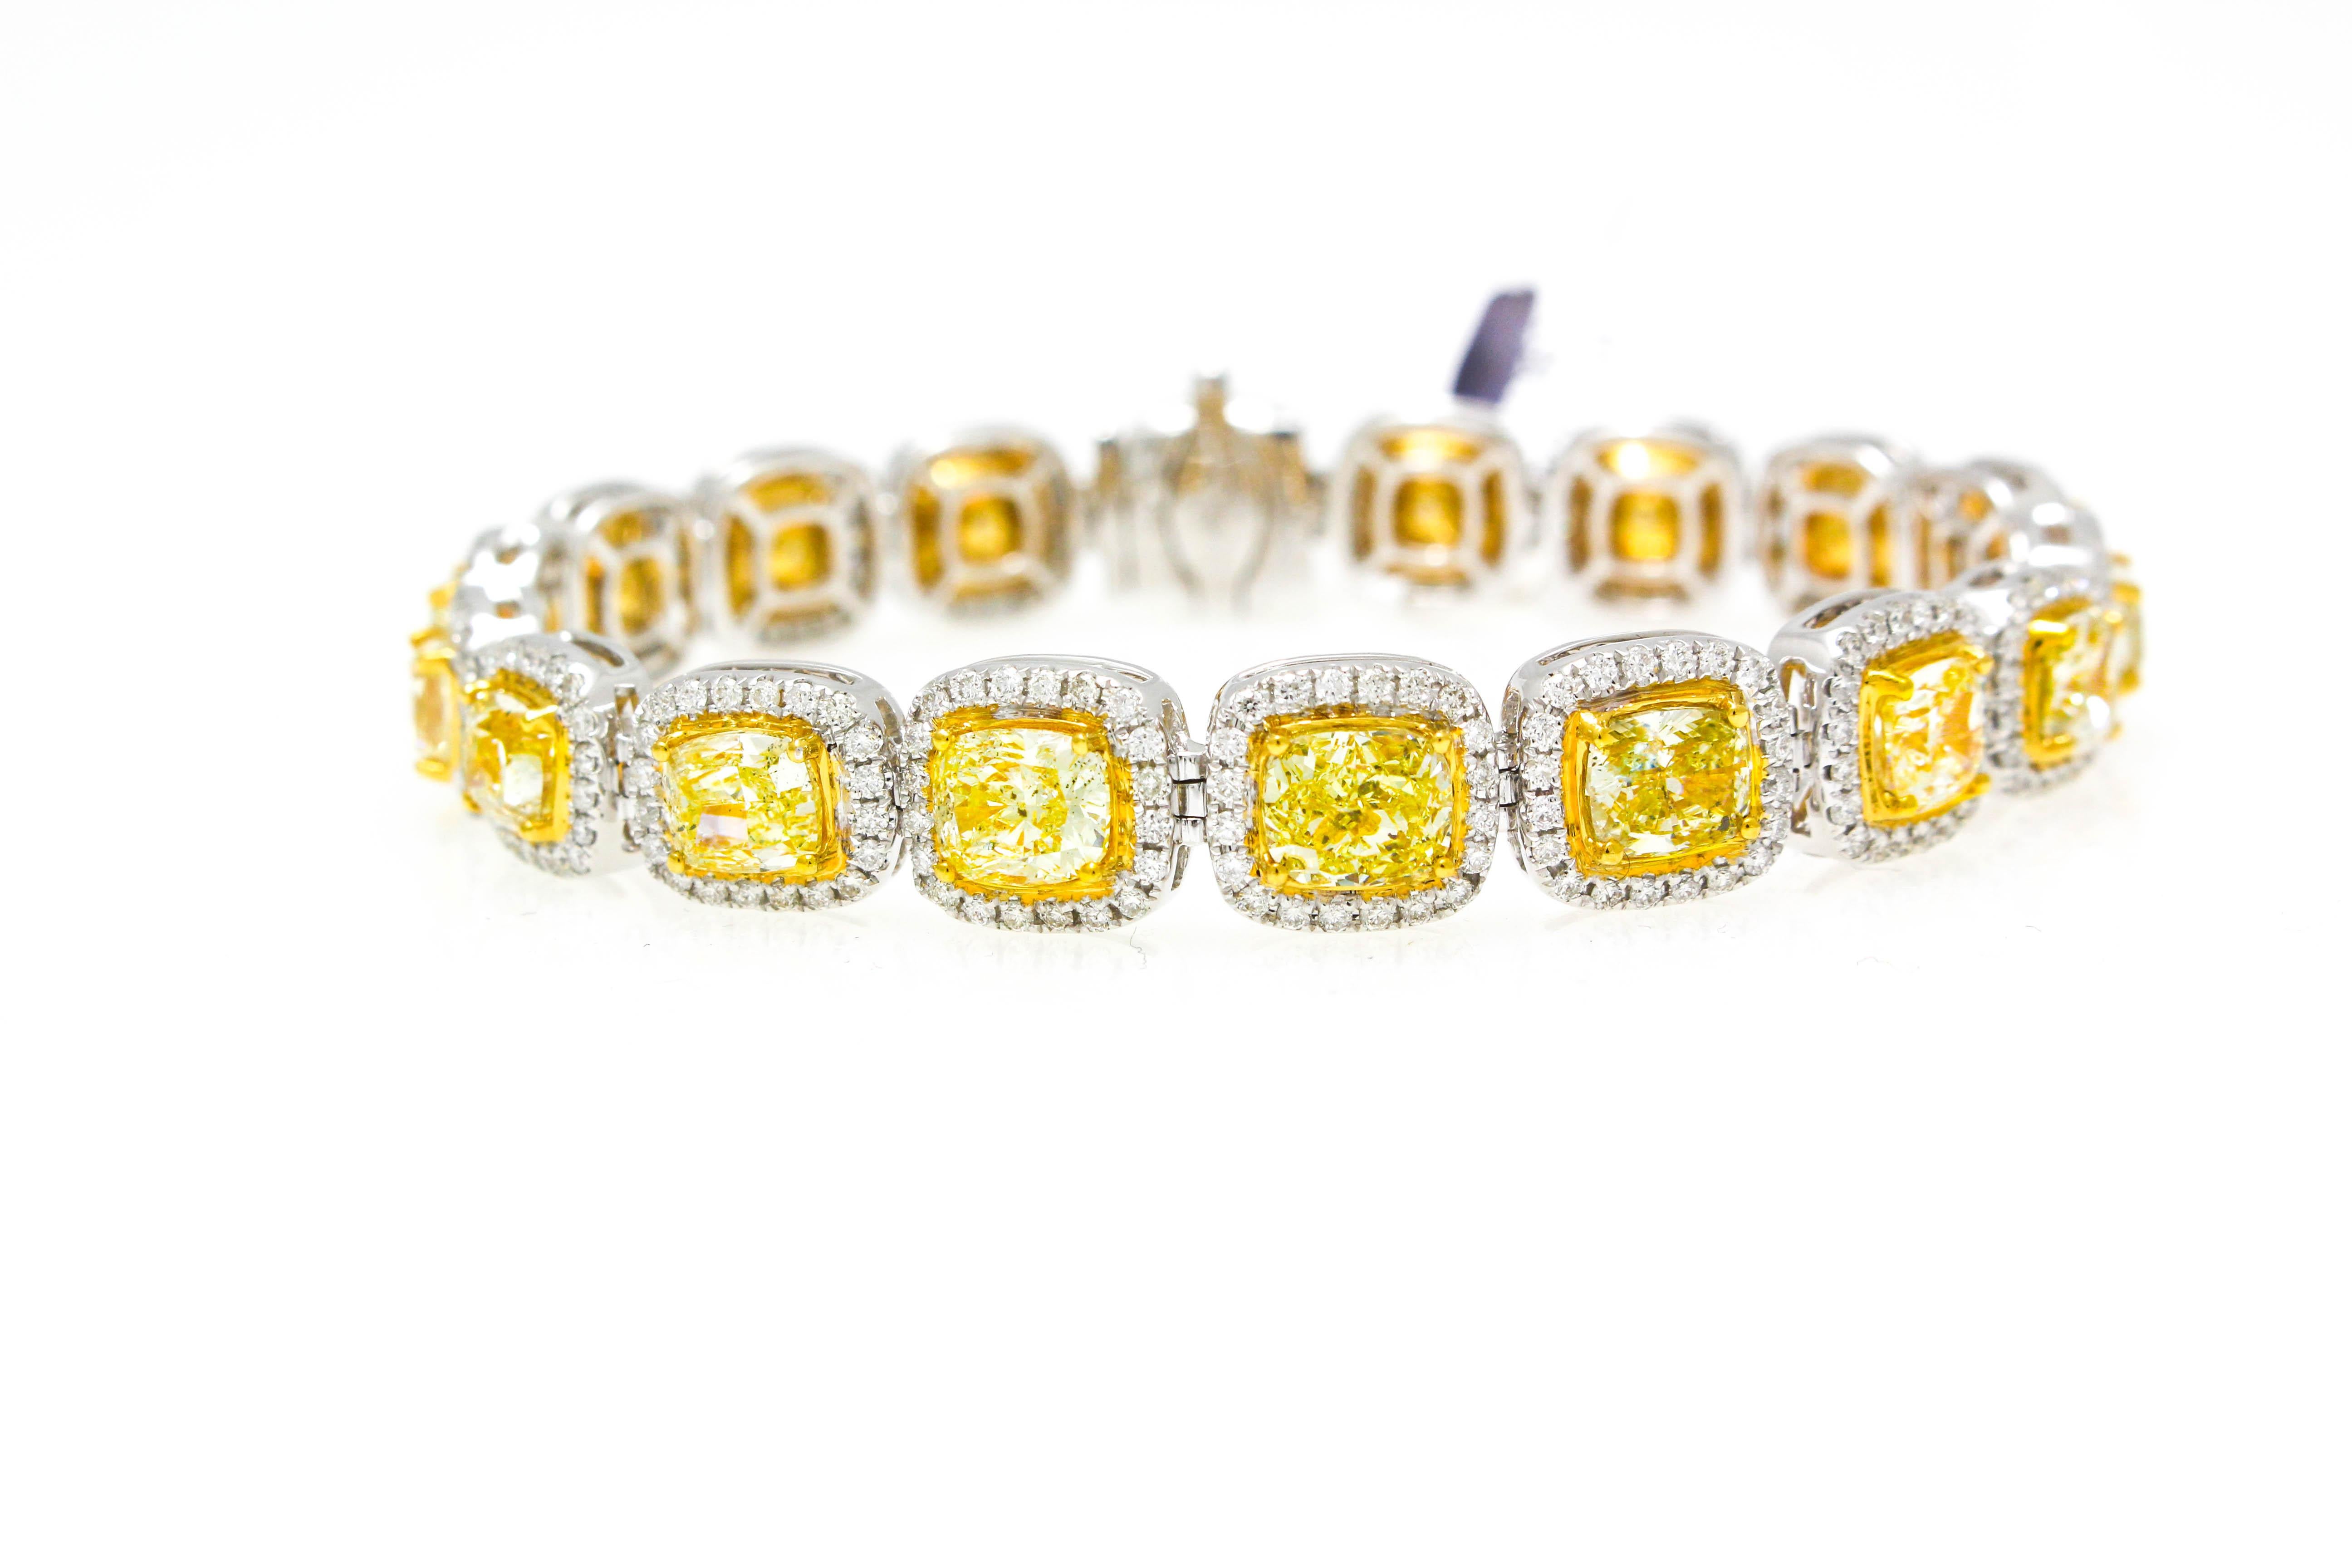 18KT Diamond fashion braclet featuring 21.20cts of custion cut fancy yellow diamonds with 5.00cts of halo around set in a two tone gold bracelet 
Diana M. is a leading supplier of top-quality fine jewelry for over 35 years.
Diana M is one-stop shop